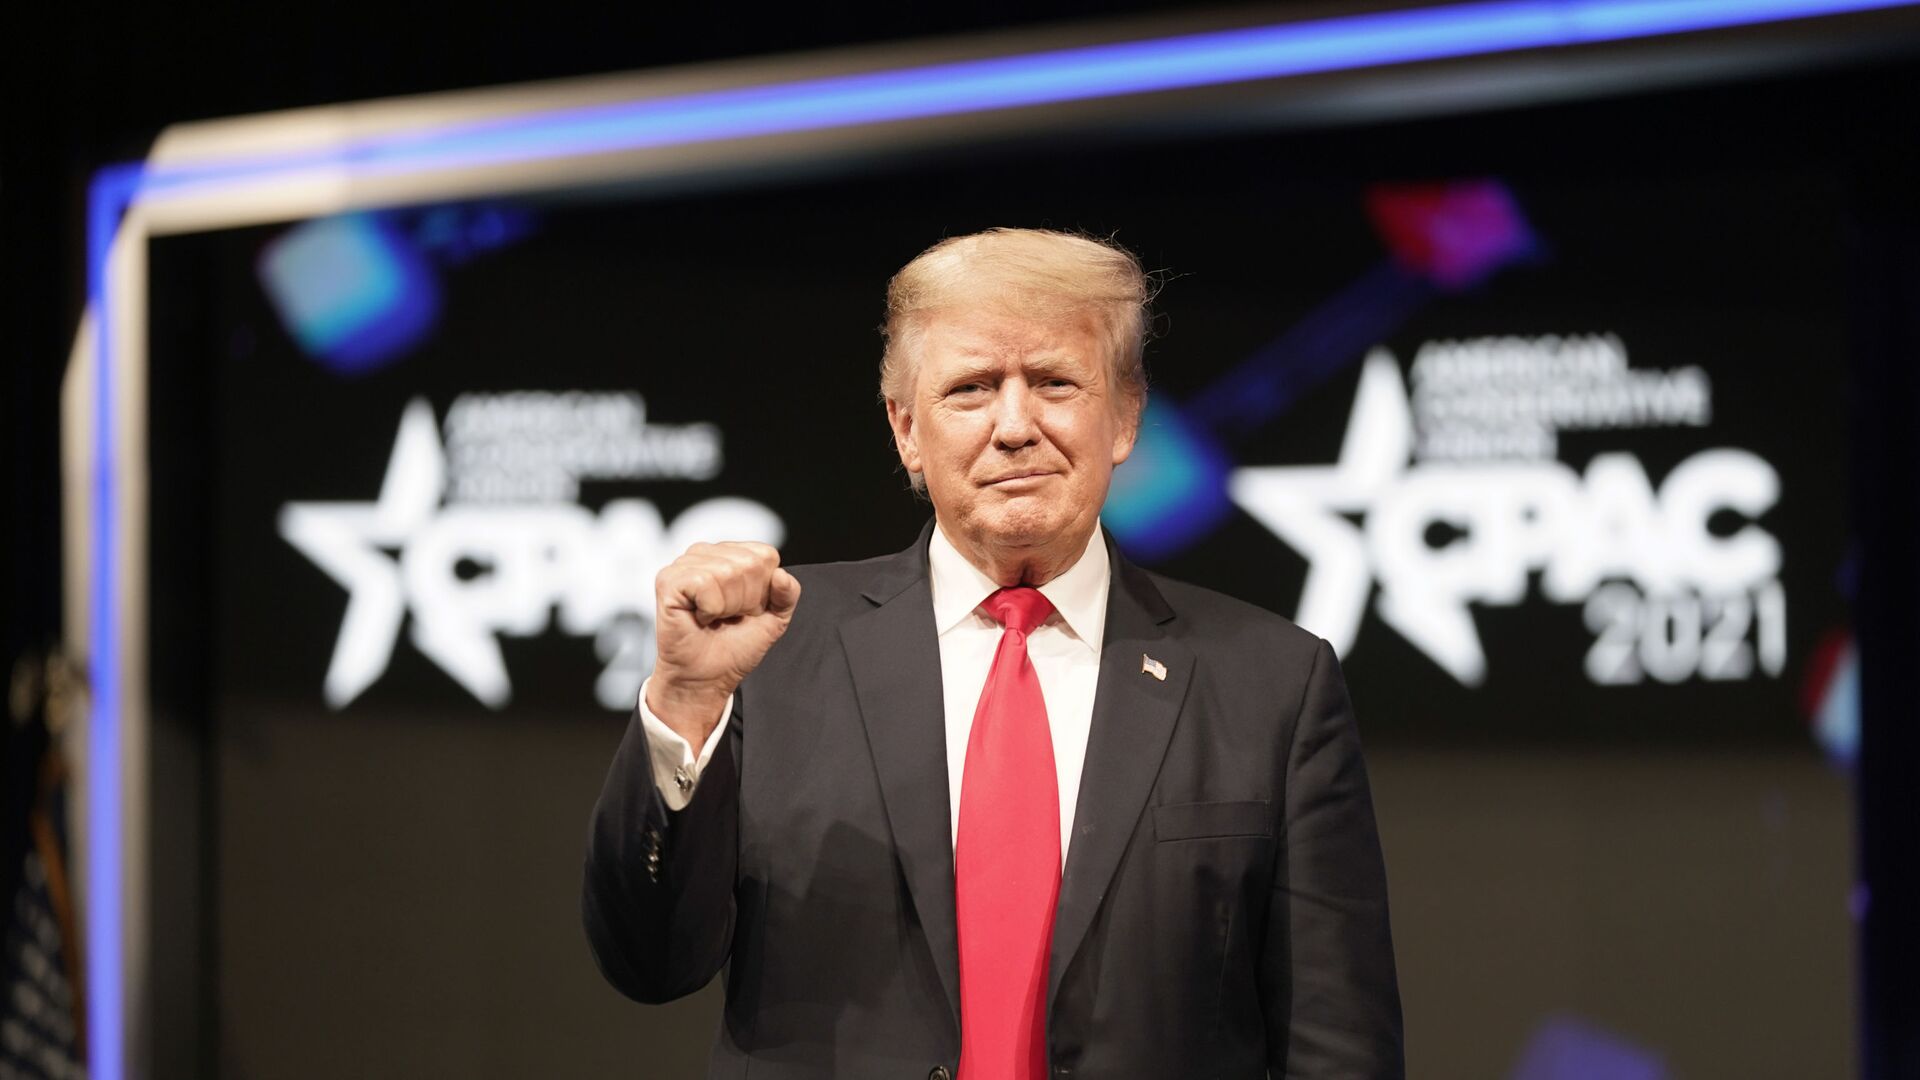 Former president Donald Trump raises his fist before speaking at the Conservative Political Action Conference (CPAC) Sunday, July 11, 2021, in Dallas.  - Sputnik International, 1920, 07.10.2021